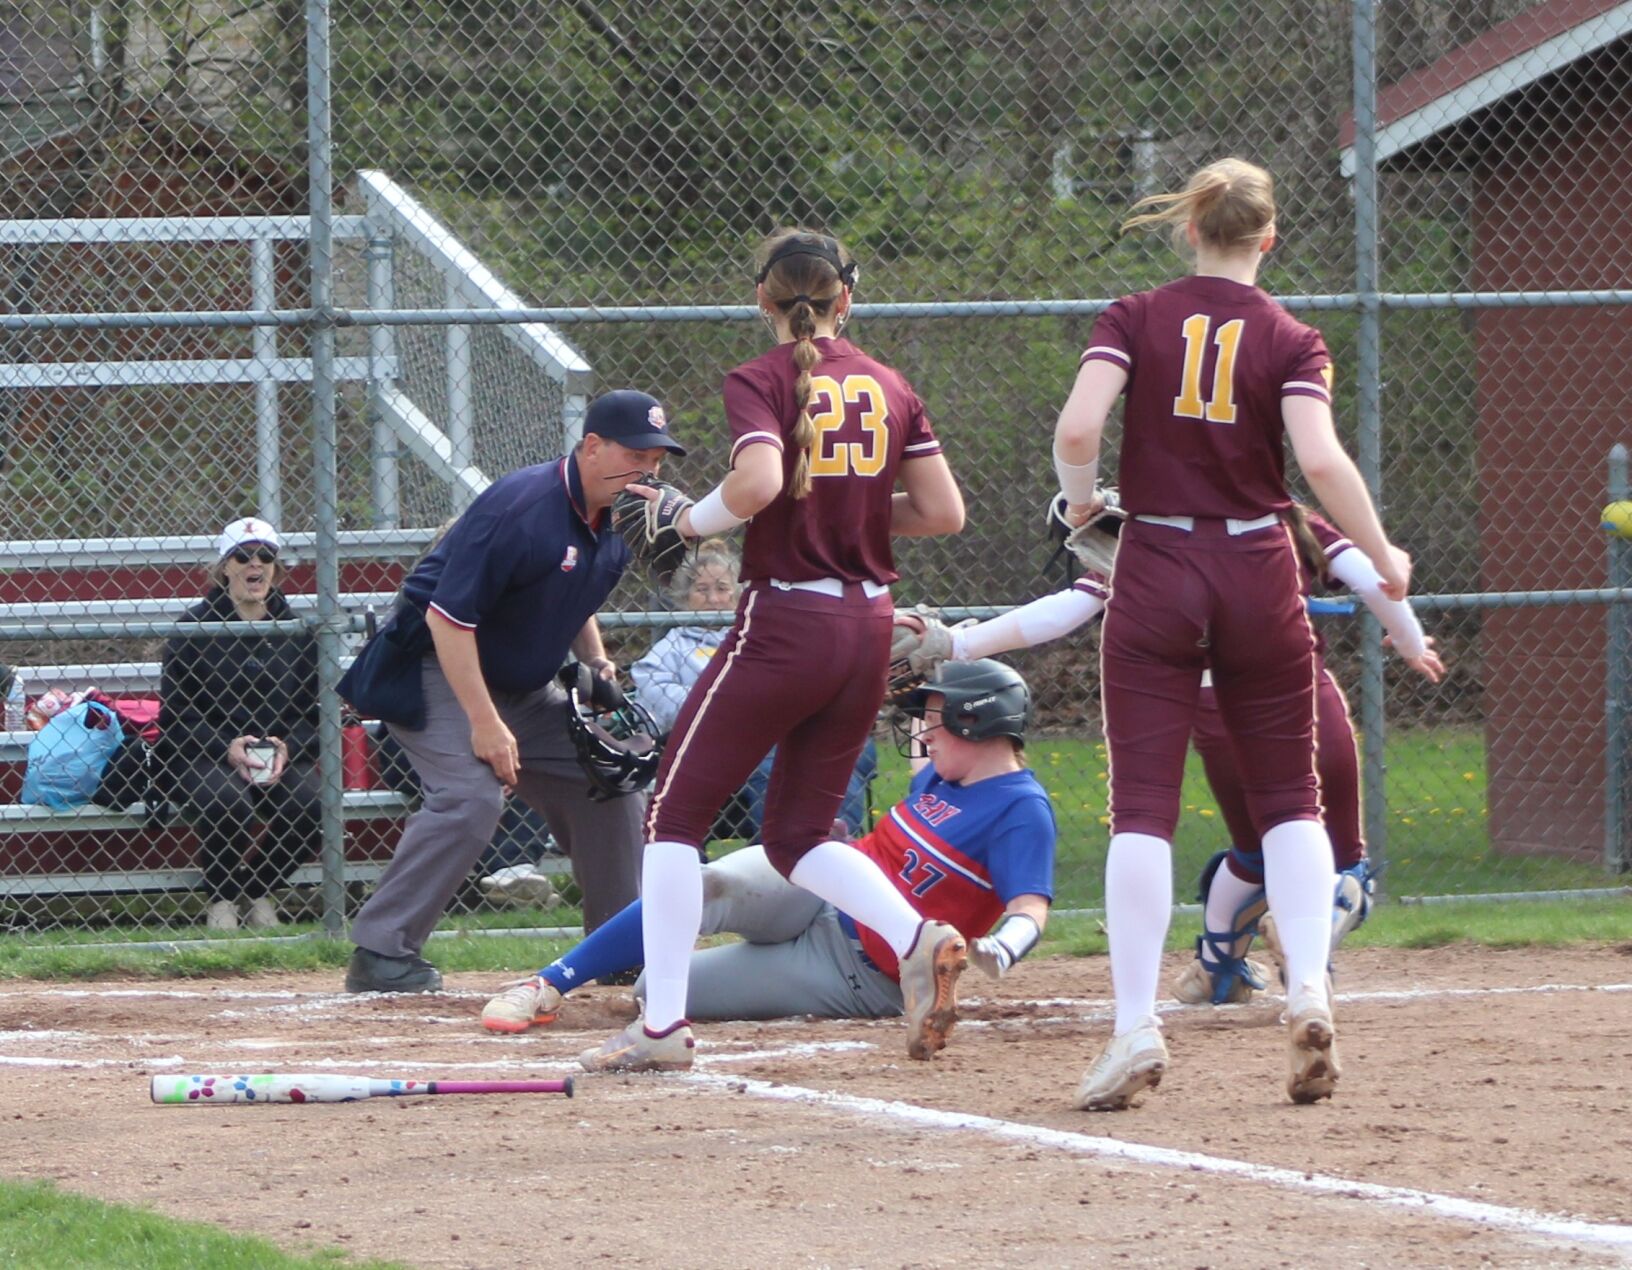 HIGH SCHOOL SOFTBALL: Shoregals find way to win in defusing Rockets